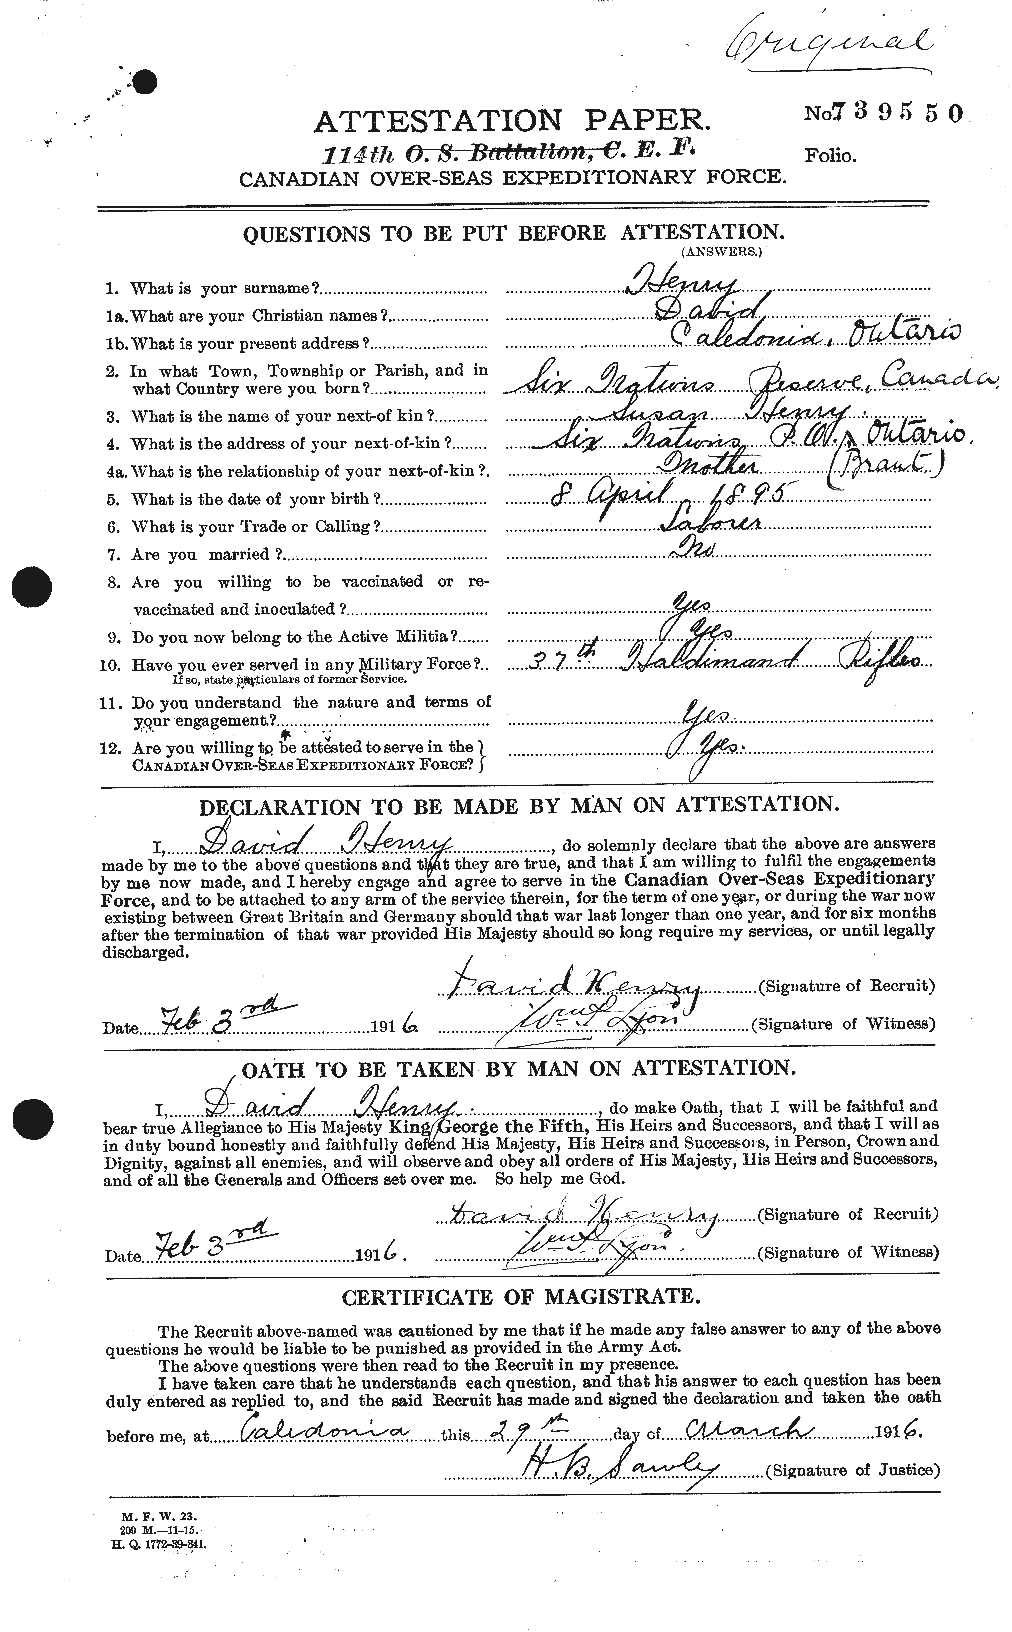 Personnel Records of the First World War - CEF 392822a